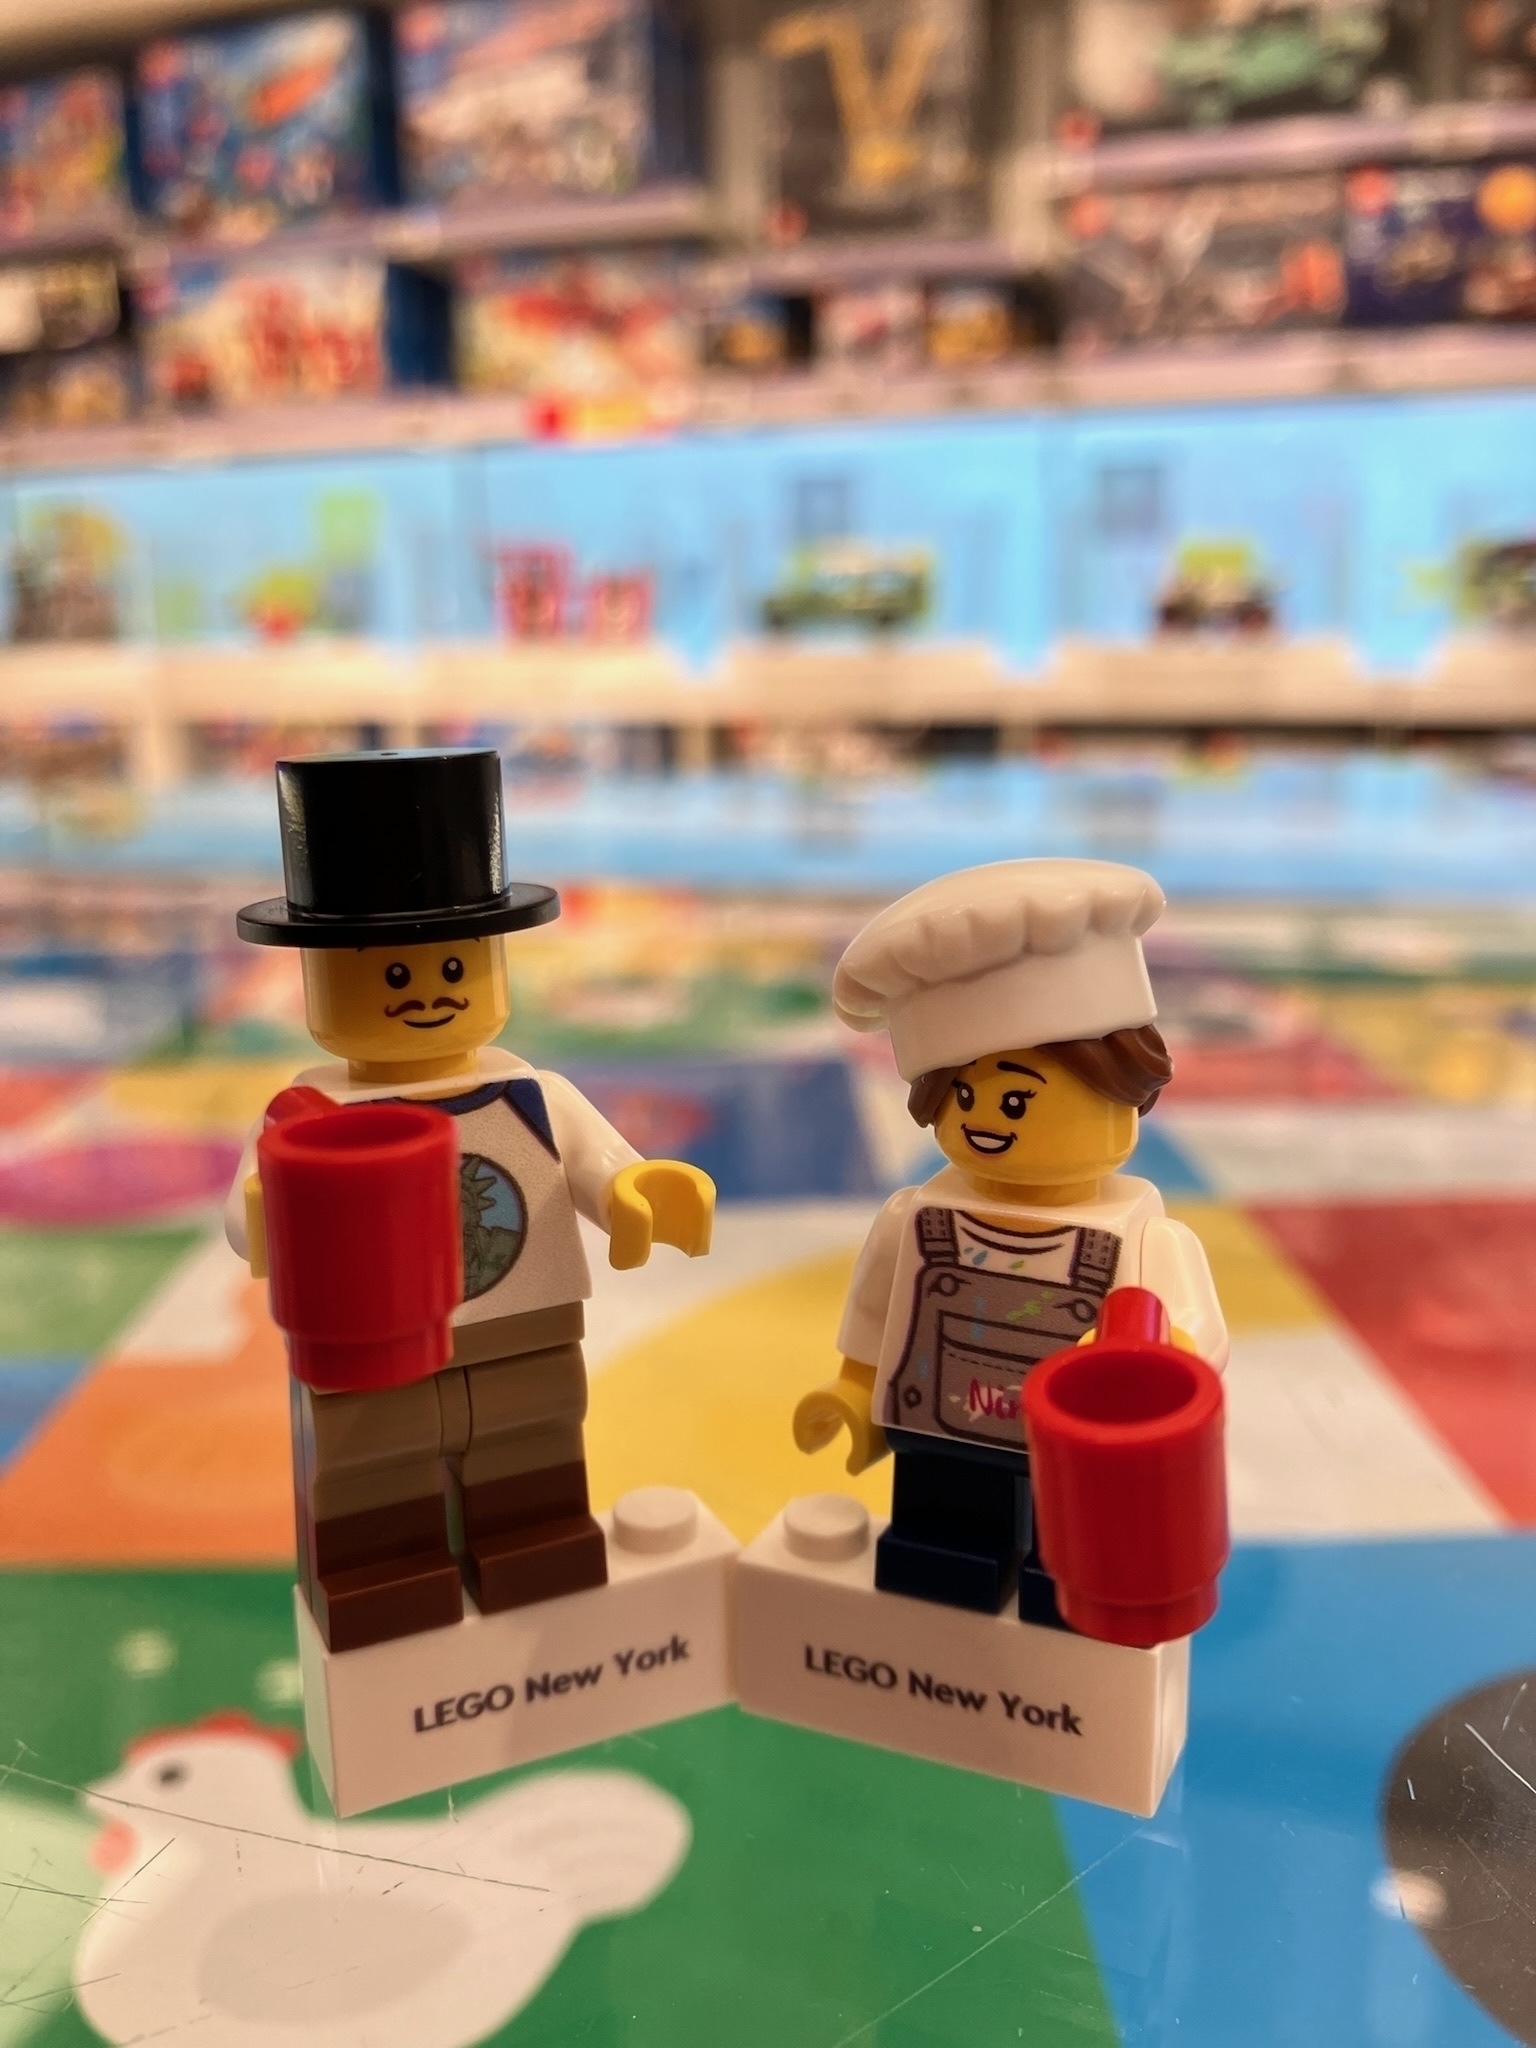 Close up of two Lego figurines. The left one is a man and he has a top hat and a red coffee cup in his hand. The right one is a woman and she has a chefs hat and a red coffee cup in her hand. 